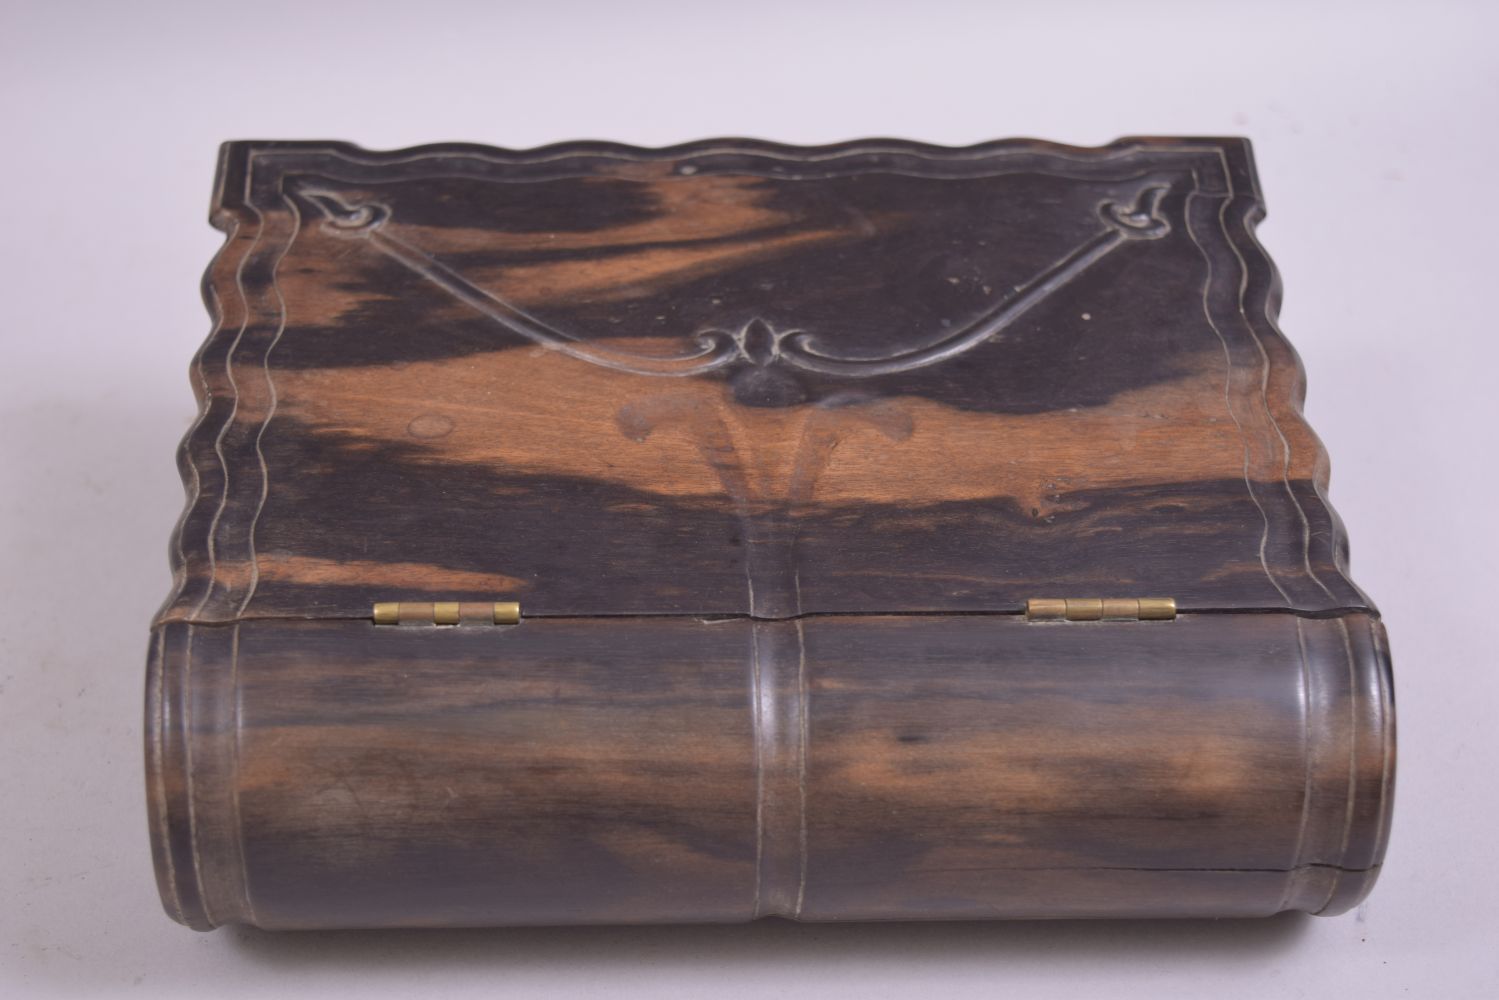 AN 18TH CENTURY CEYLONESE COROMANDEL WOODEN BIBLE BOX, with hinged lid and lock (lacking key), the - Image 5 of 7